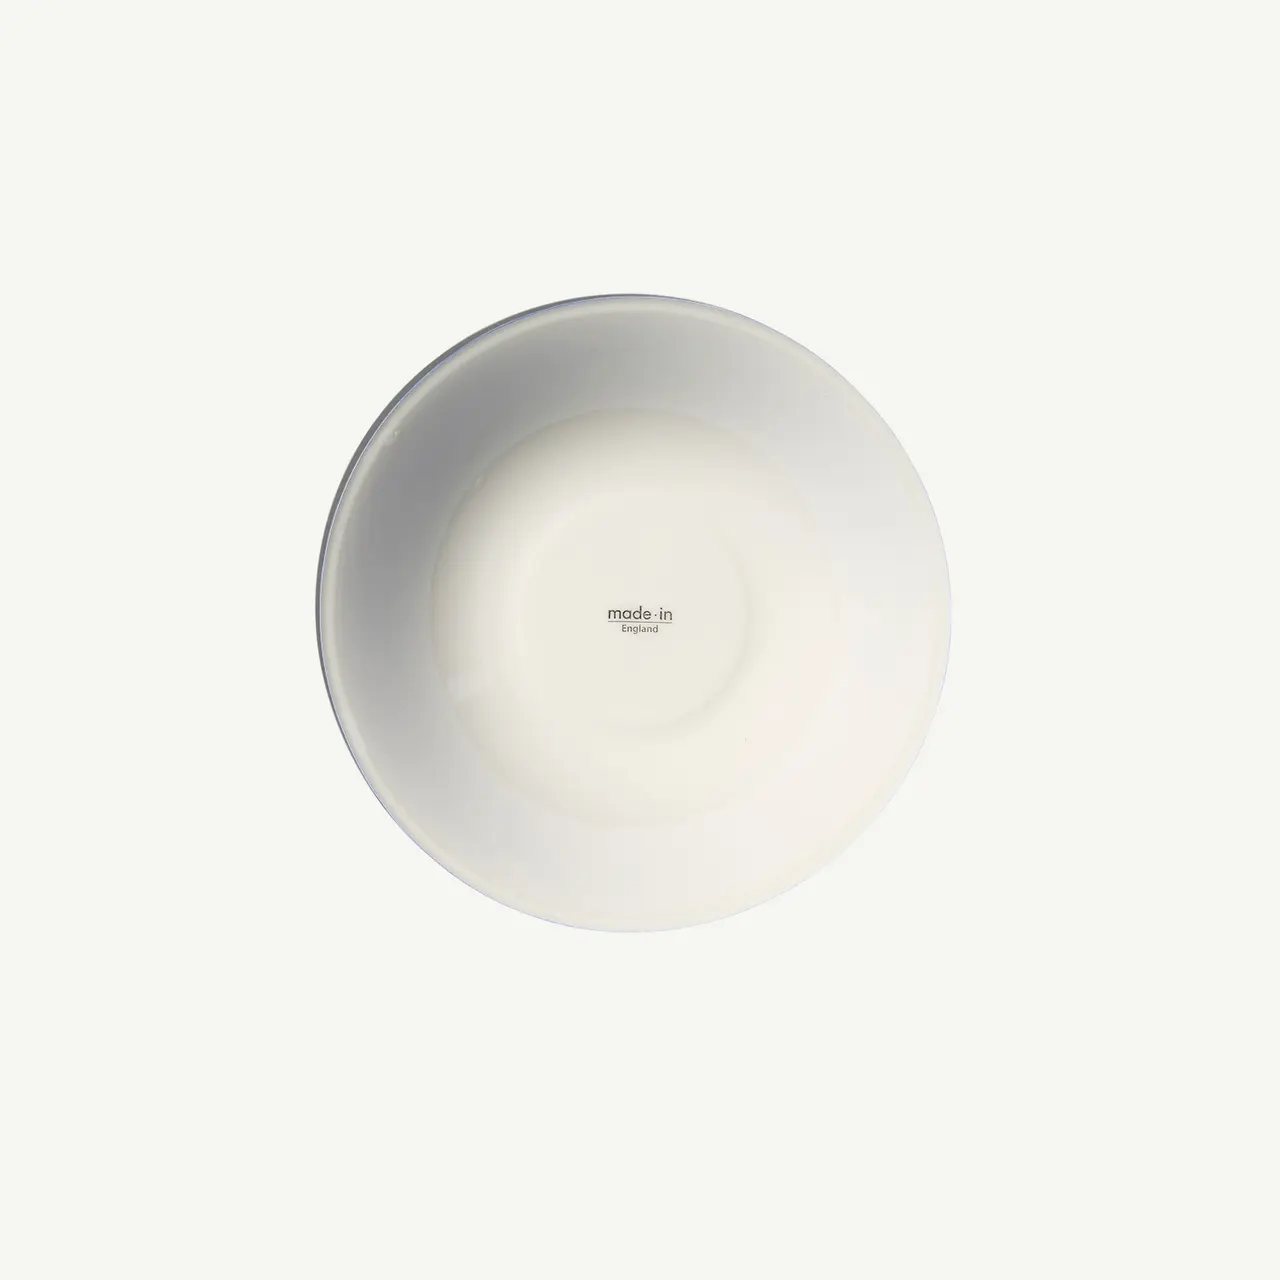 A plain white plate with "made in" text at the center against a light background.